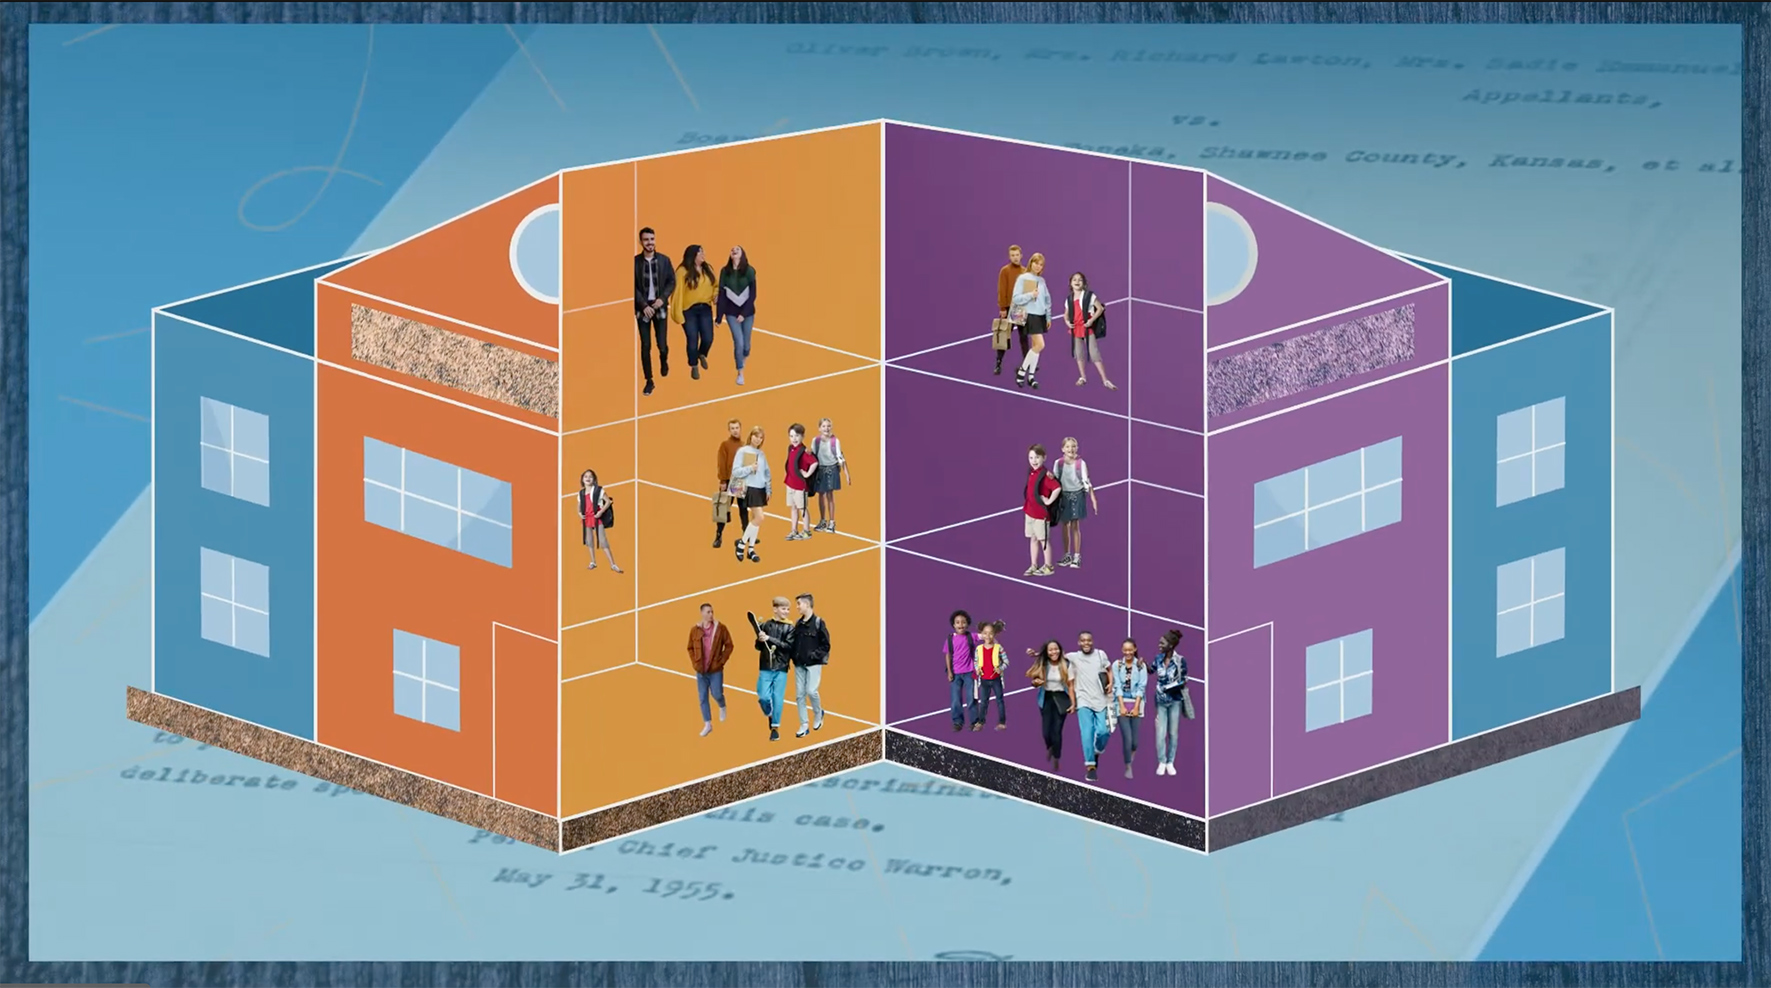 A screenshot from an animated video produced by Graphicacy for AIR, describing the barriers to solving school segregation in the United States